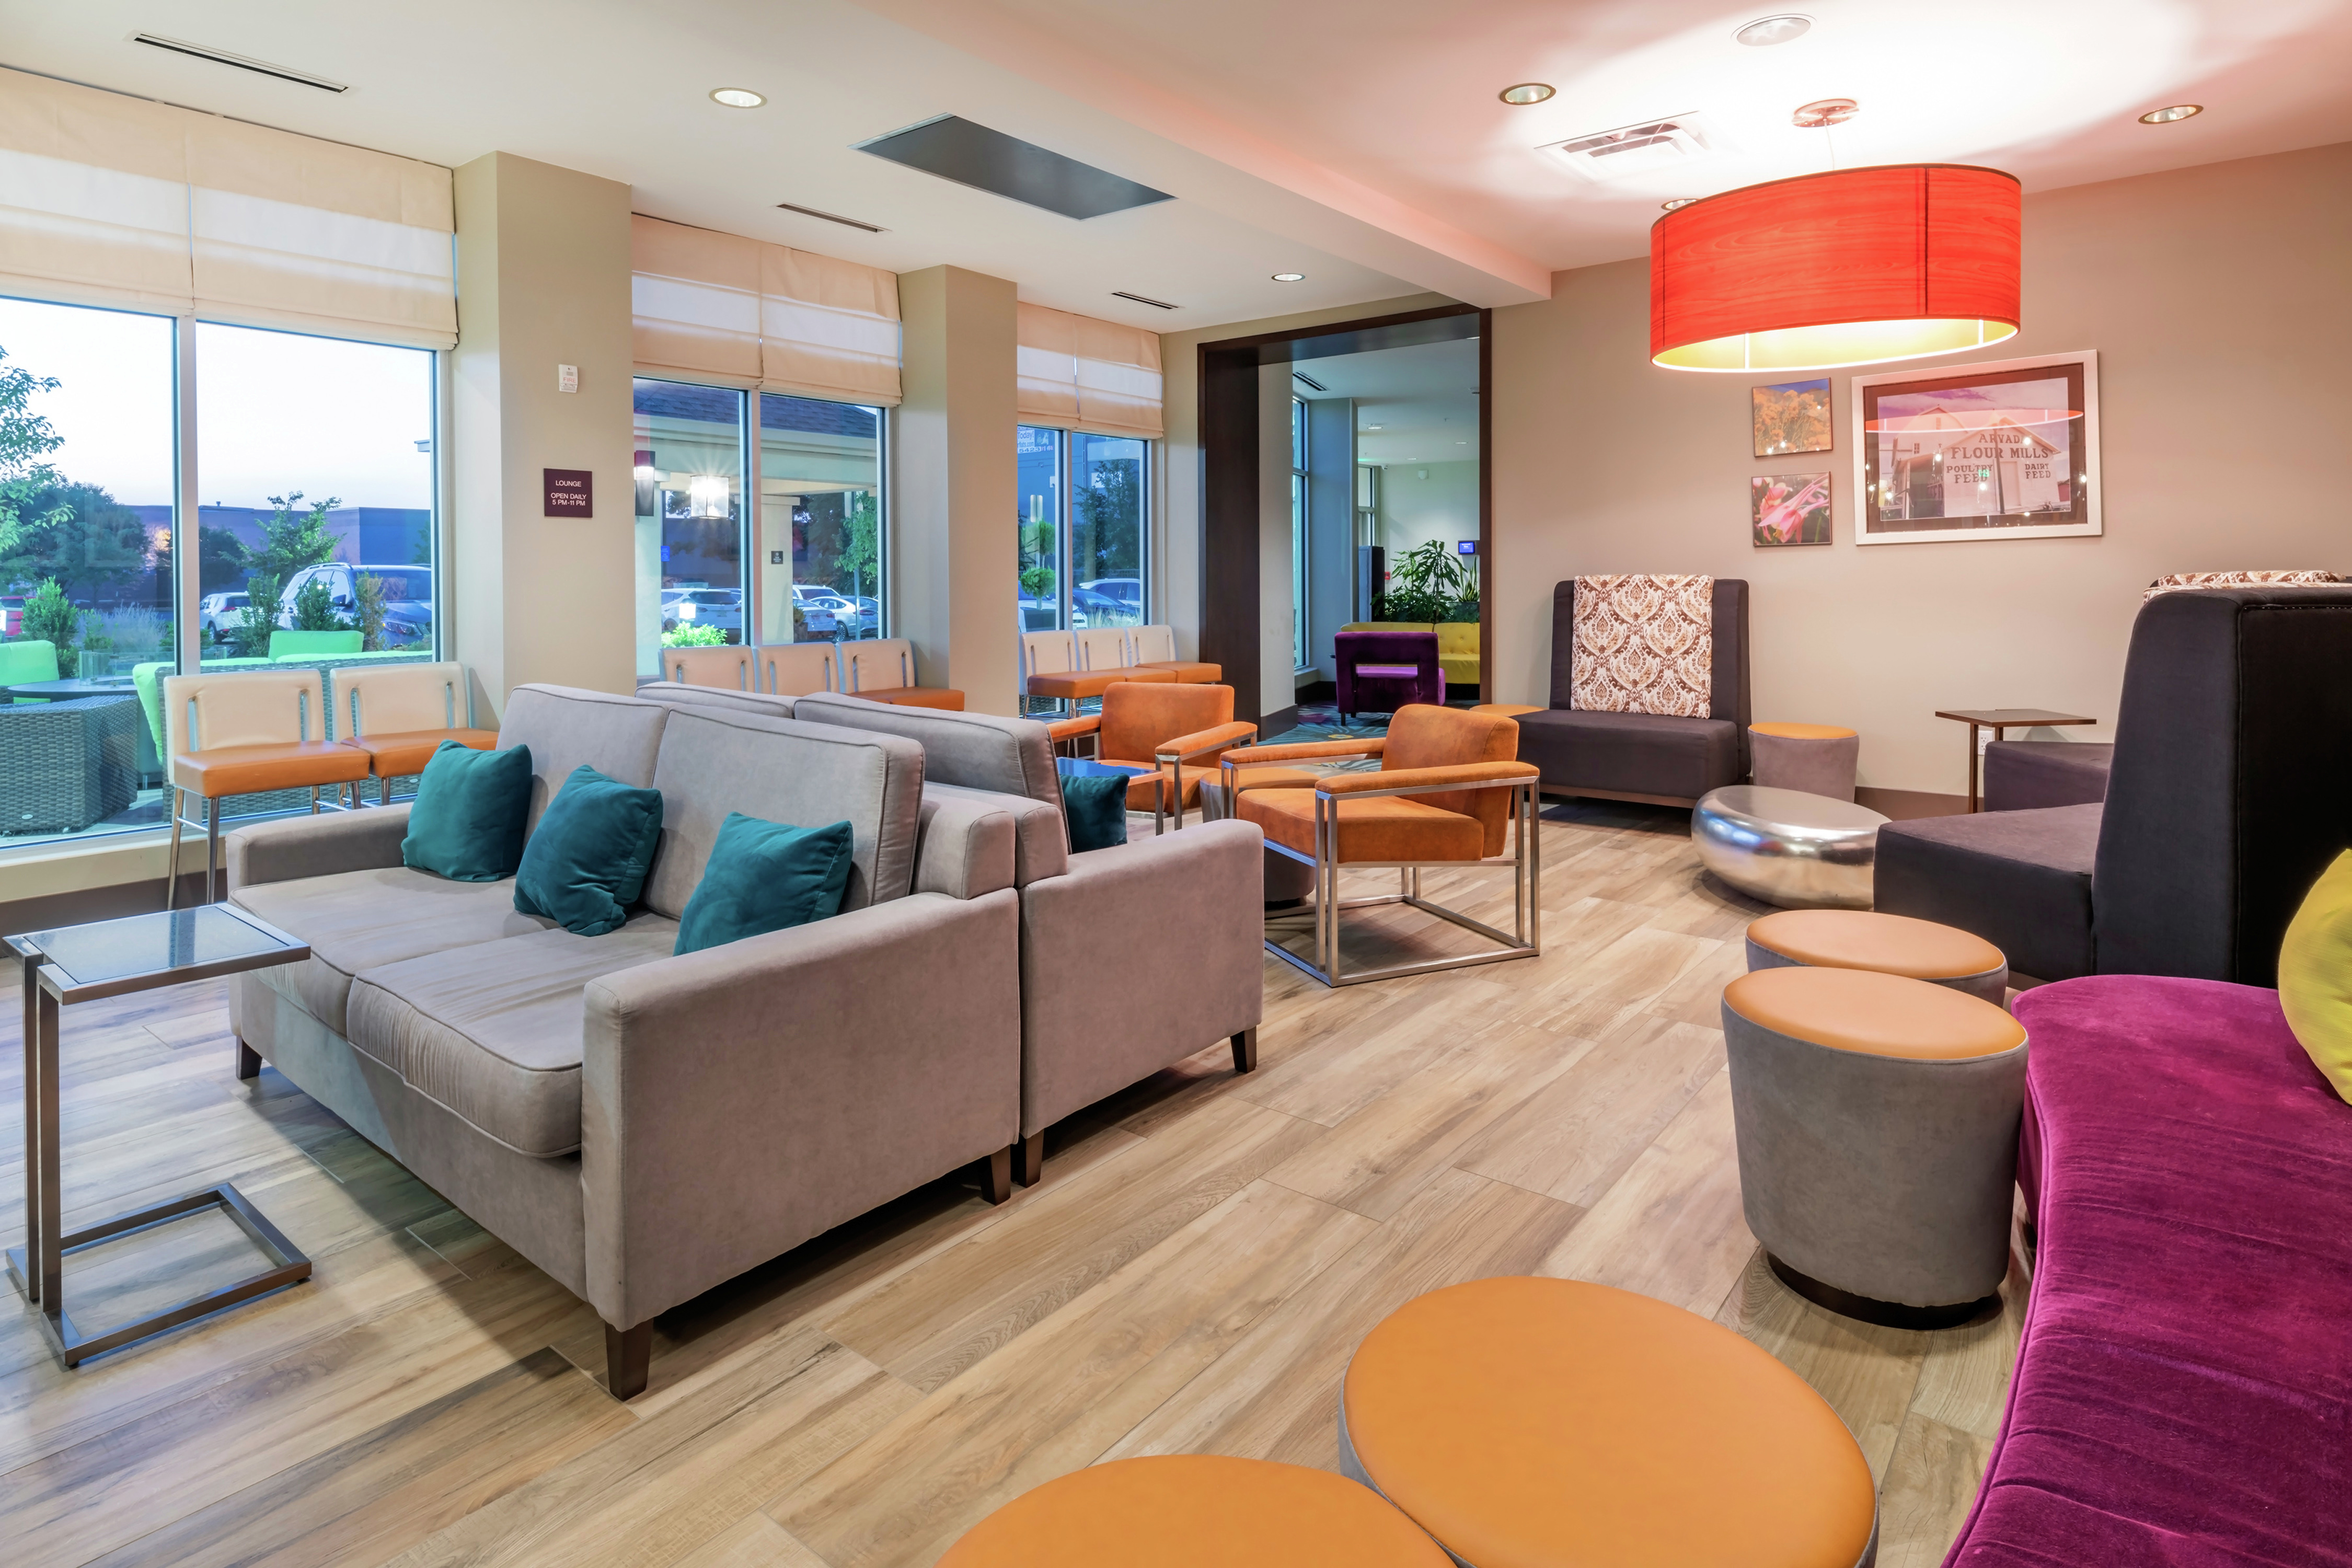 Hilton Garden Inn Lounge Area with Seats, Tables, and Outside View